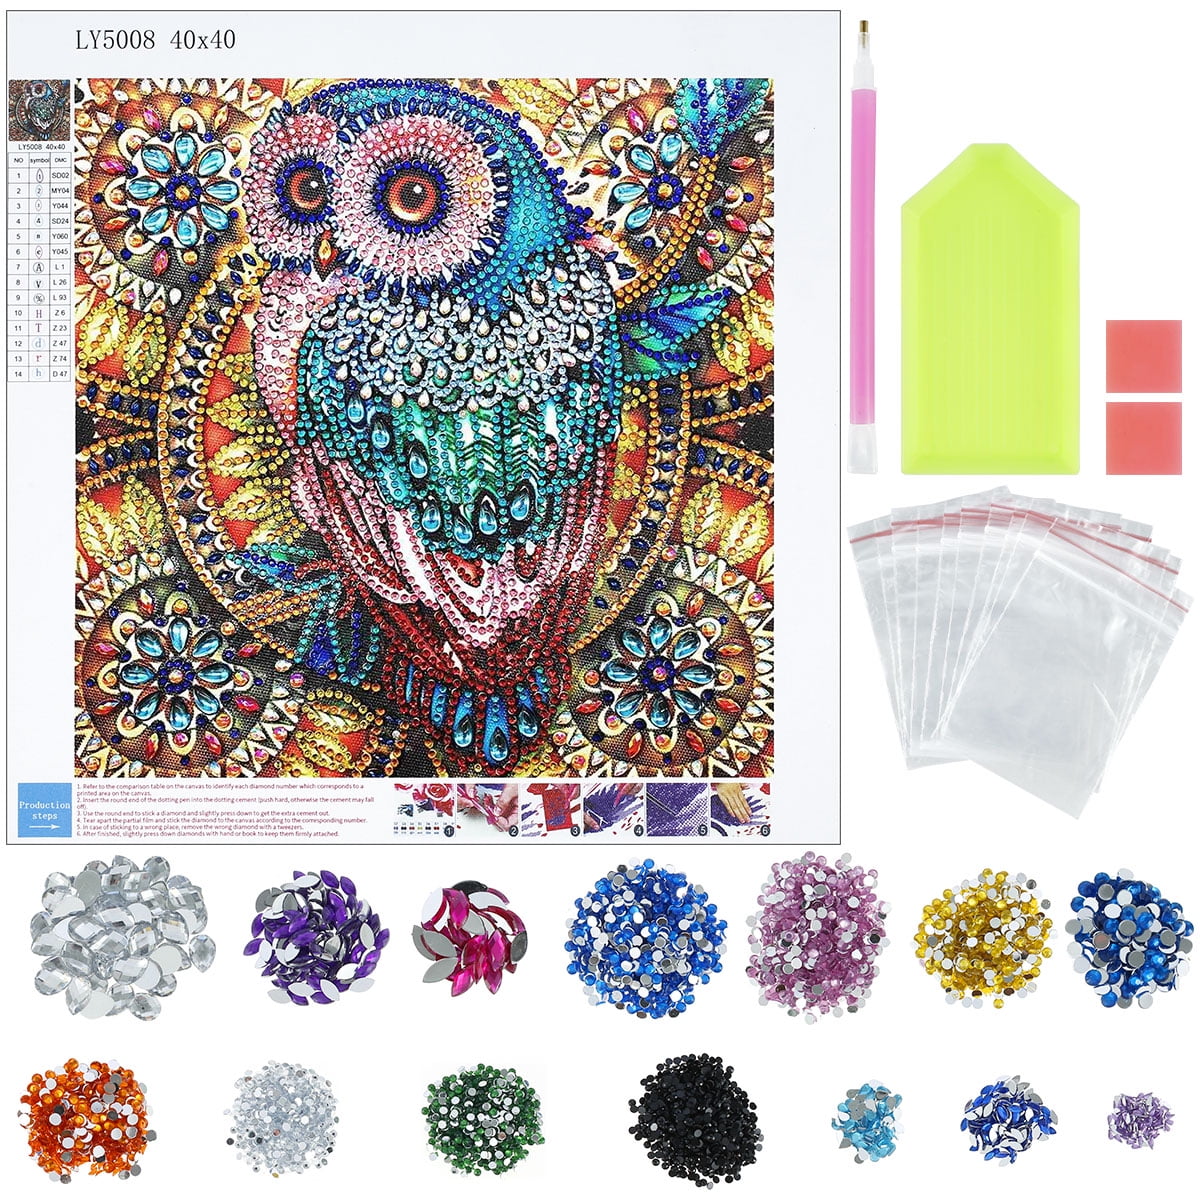  Mushroom Diamond Painting Kits for Adults 2 Pack, Skeleton  Diamond Art Kits 5D DIY Diamond Paintings Kit for Adults Full Drill Gem  Painting Kit for Home Wall Decor Gifts 12x16Inch